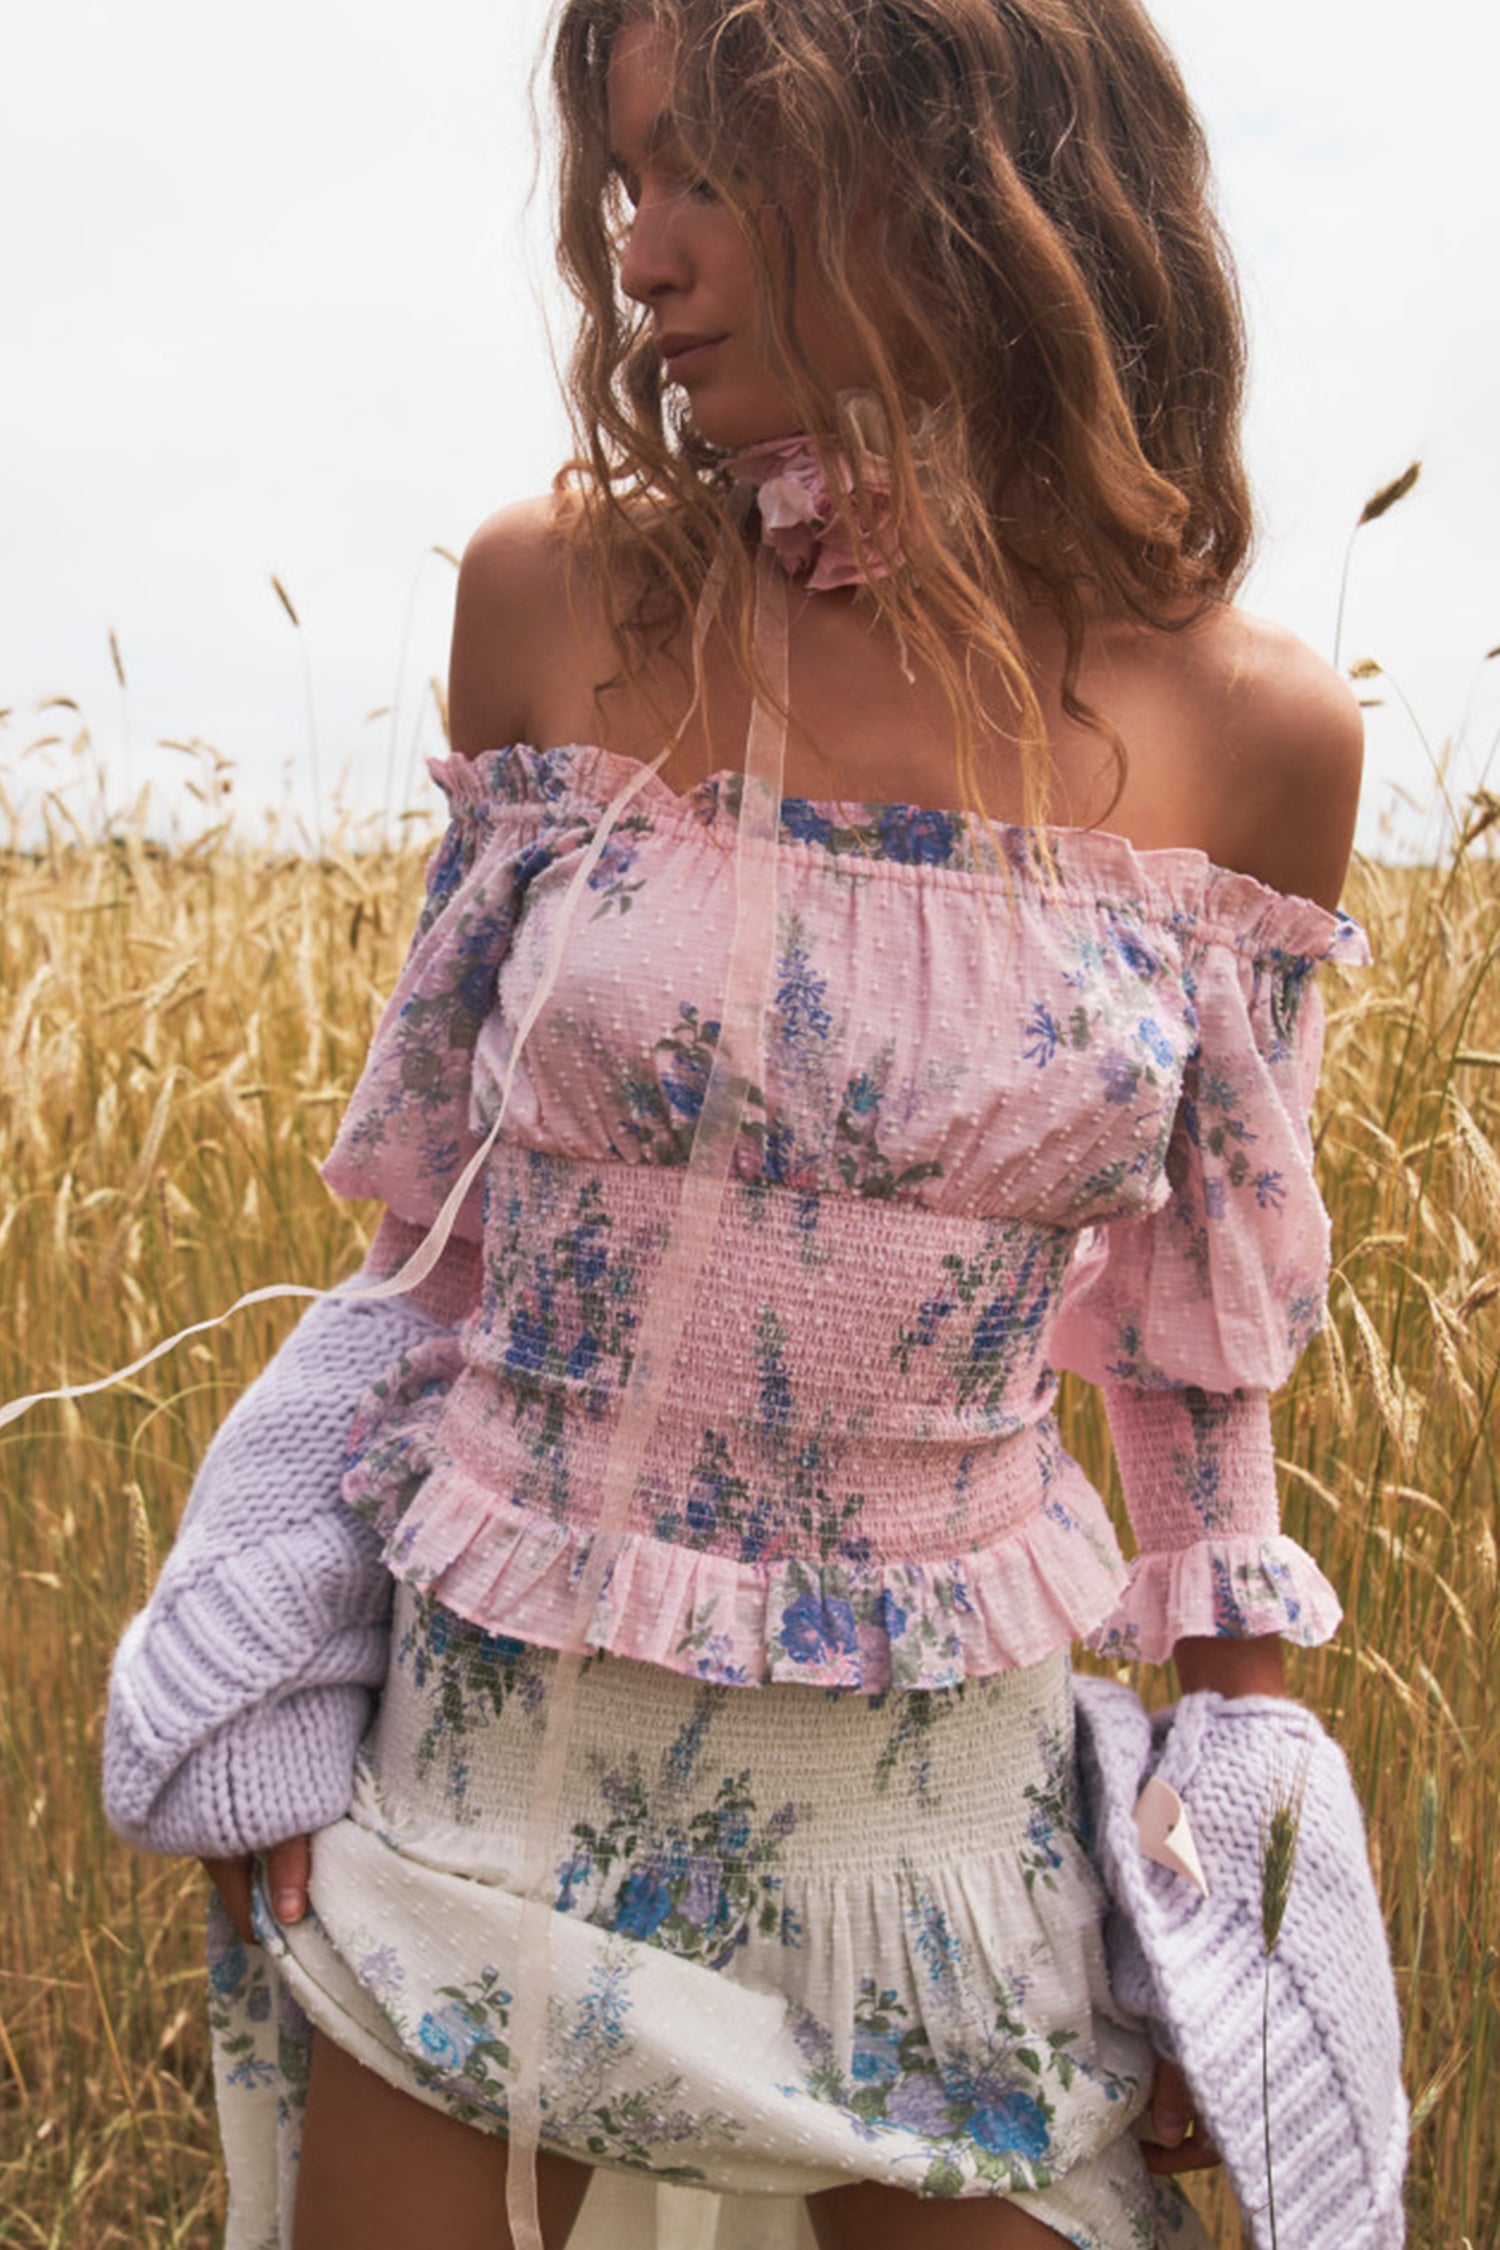 The Fifi top features an heirloom bouquet print on a soft textured dot cotton fabric with an elasticized opening at the shoulders and a smocking at the waist and sleeves.